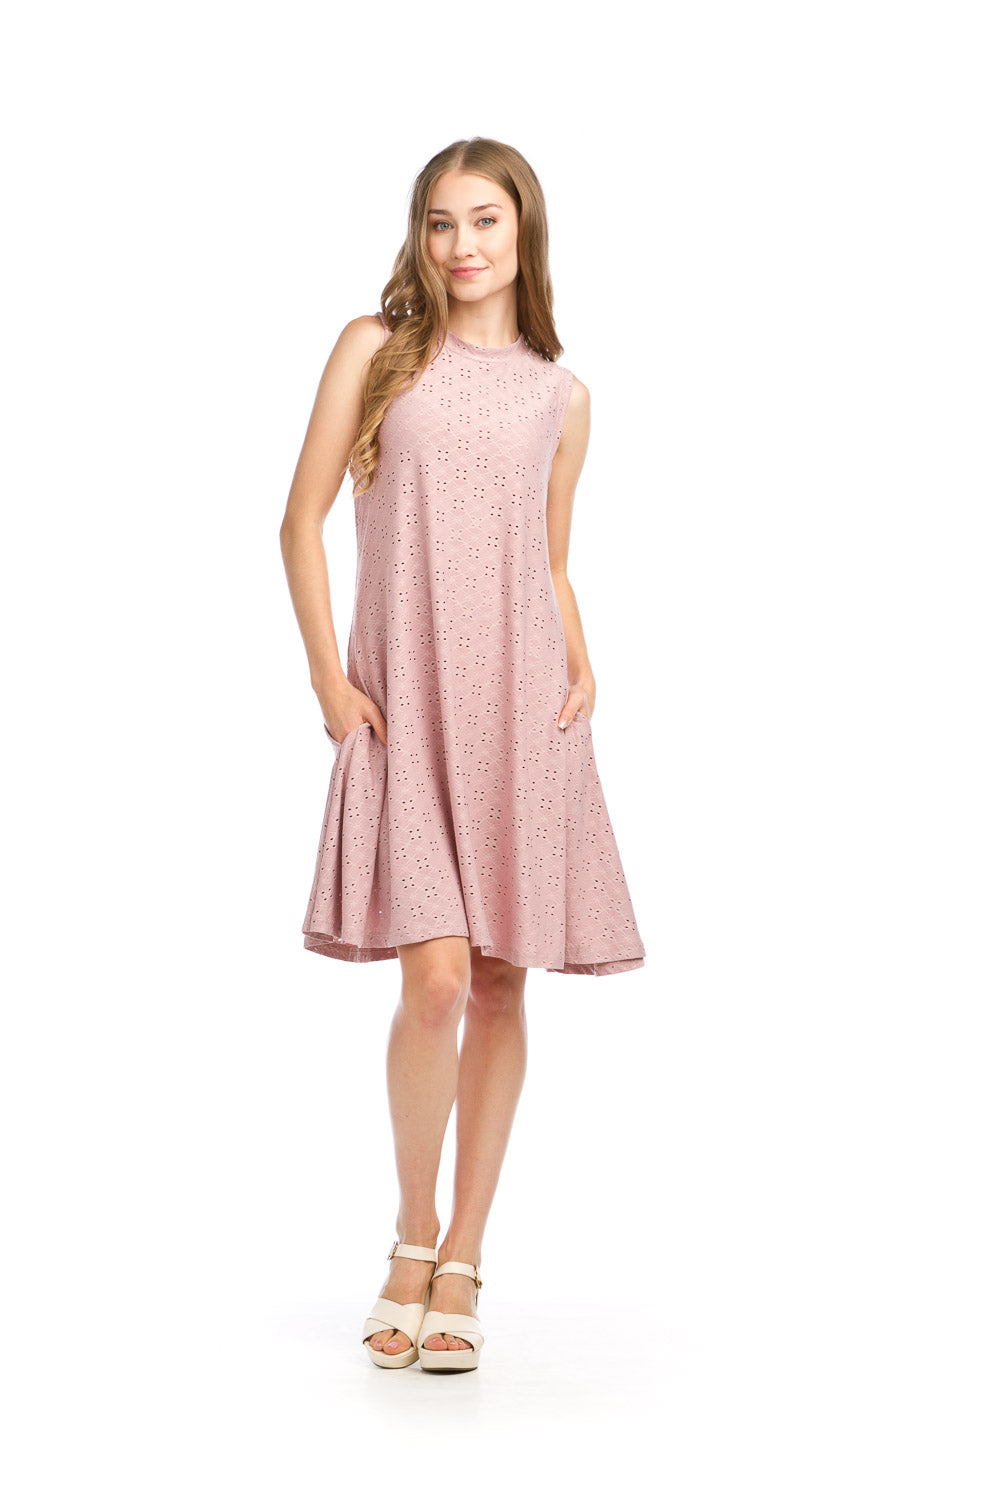 PD16556 ROSE Stretch Eyelet A-Line Dress woth Pockets